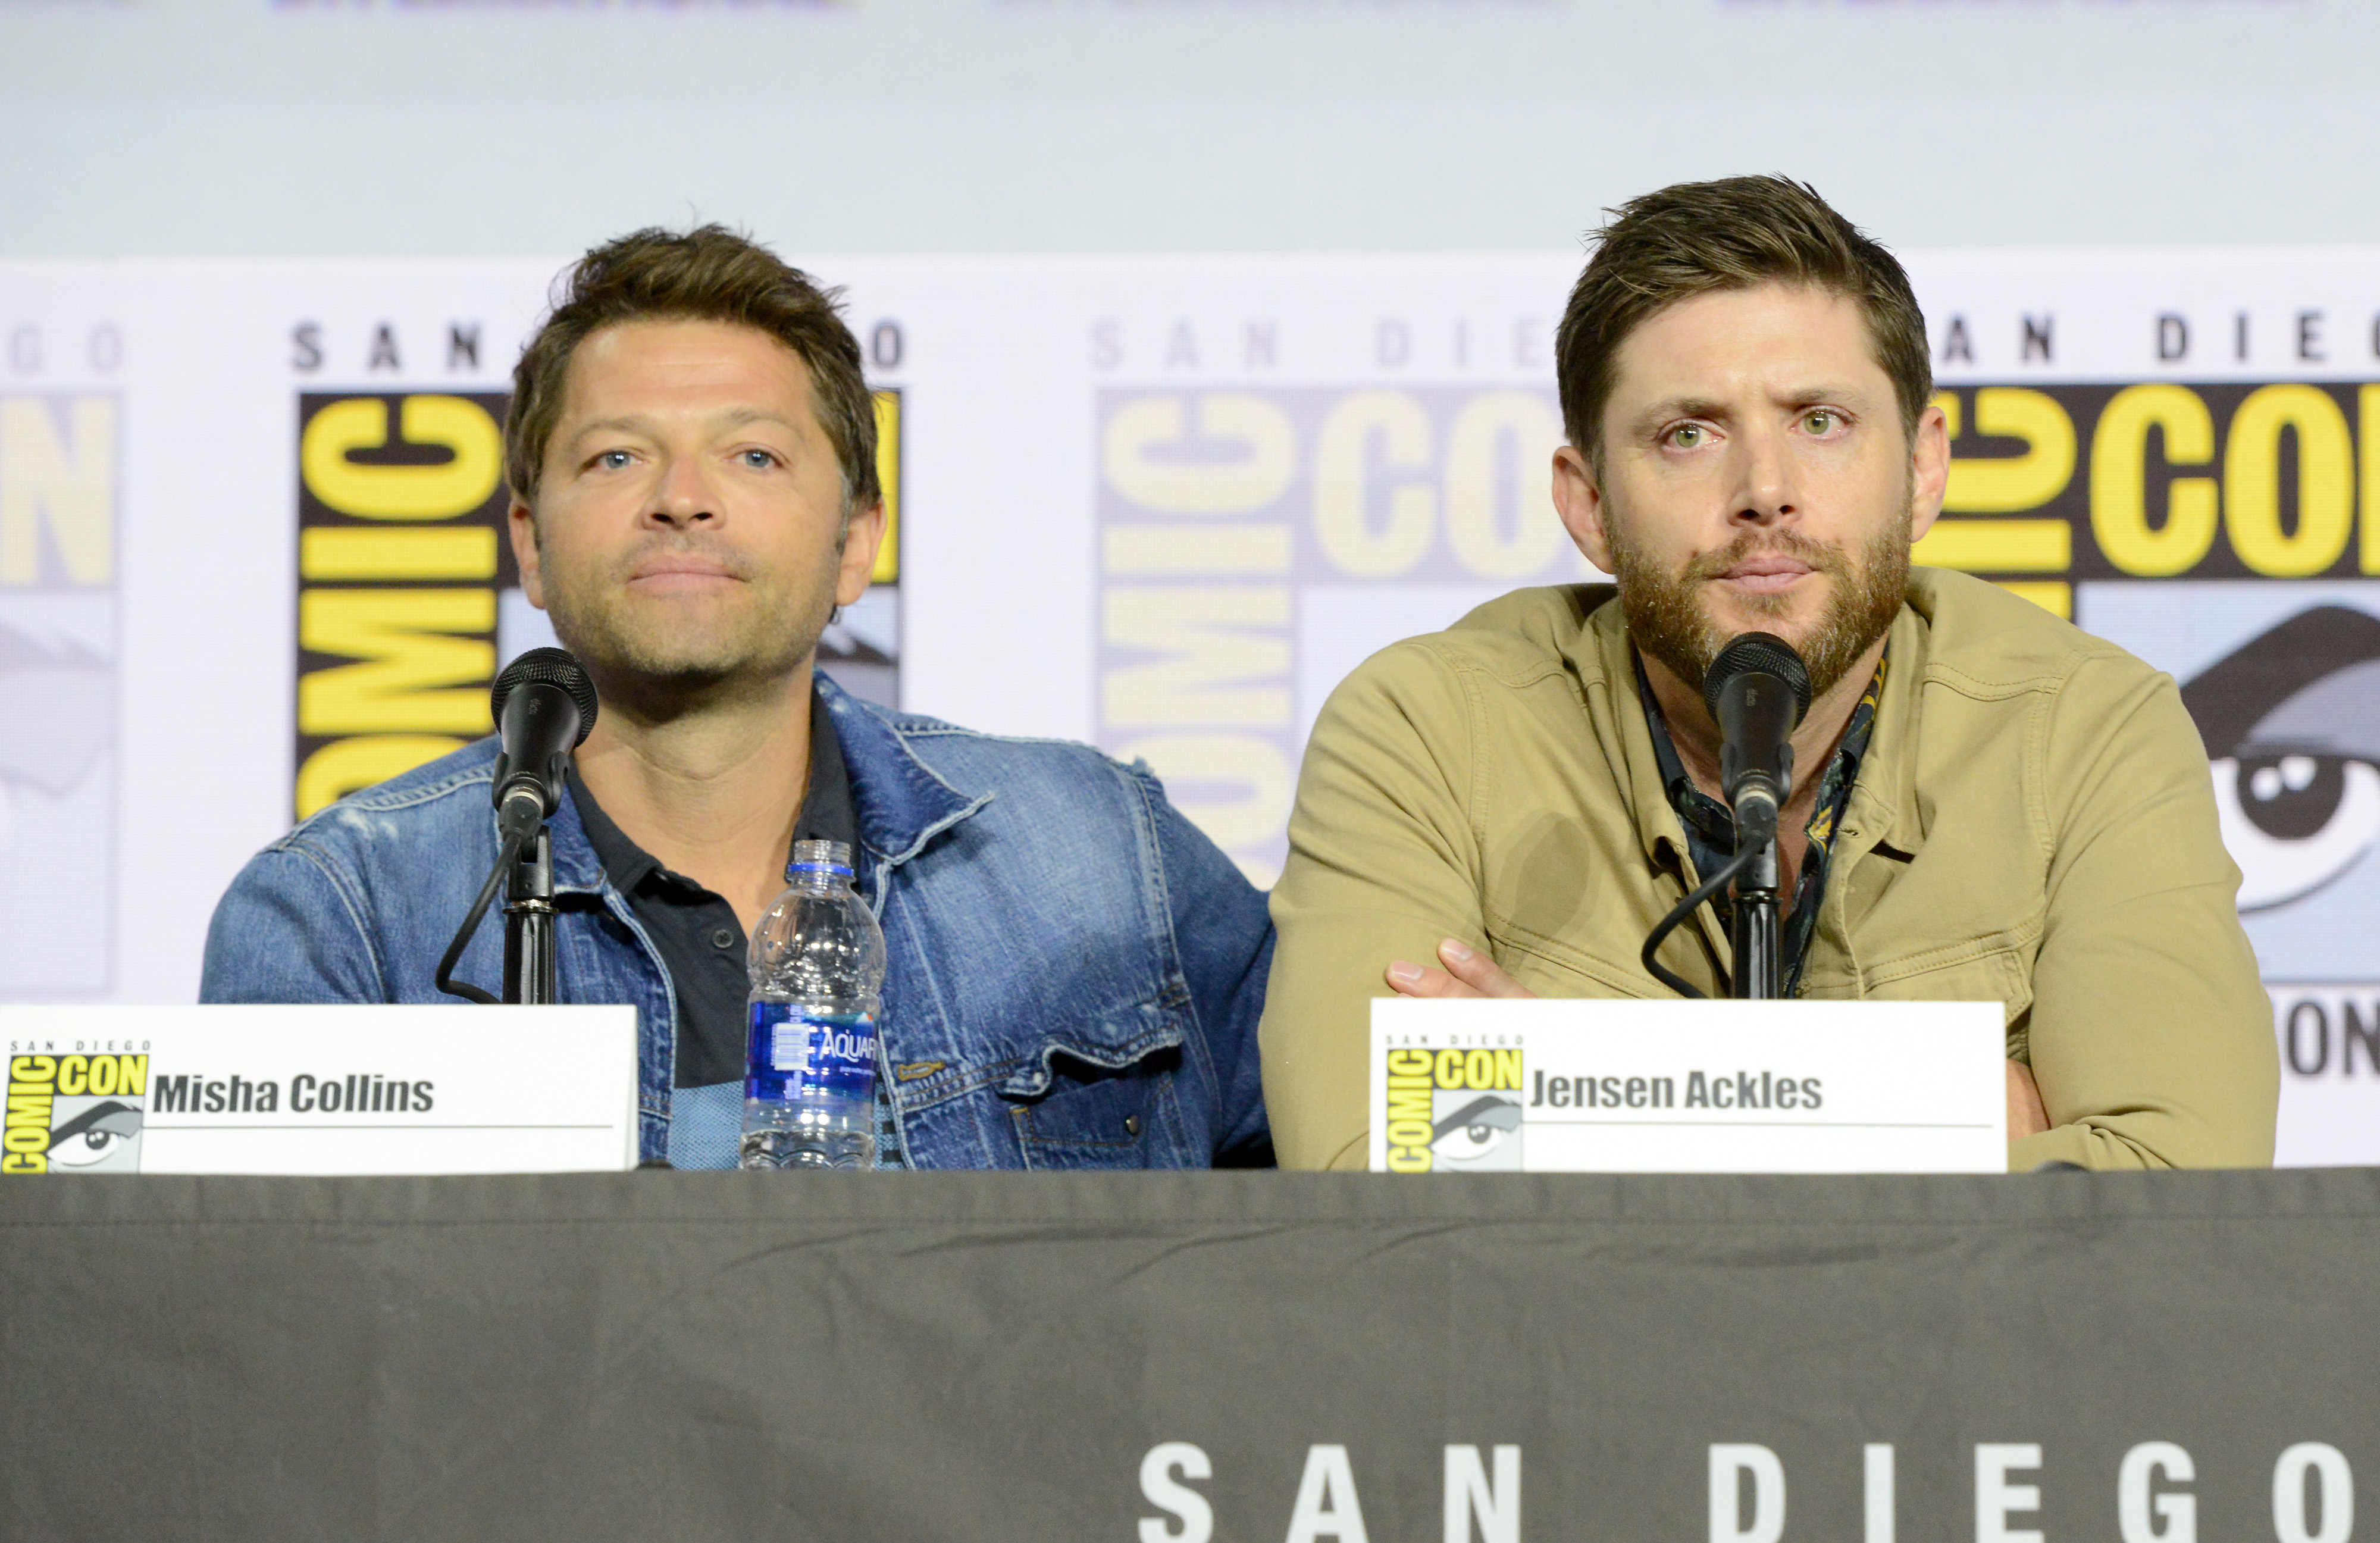 the two sitting next to each other at comic con